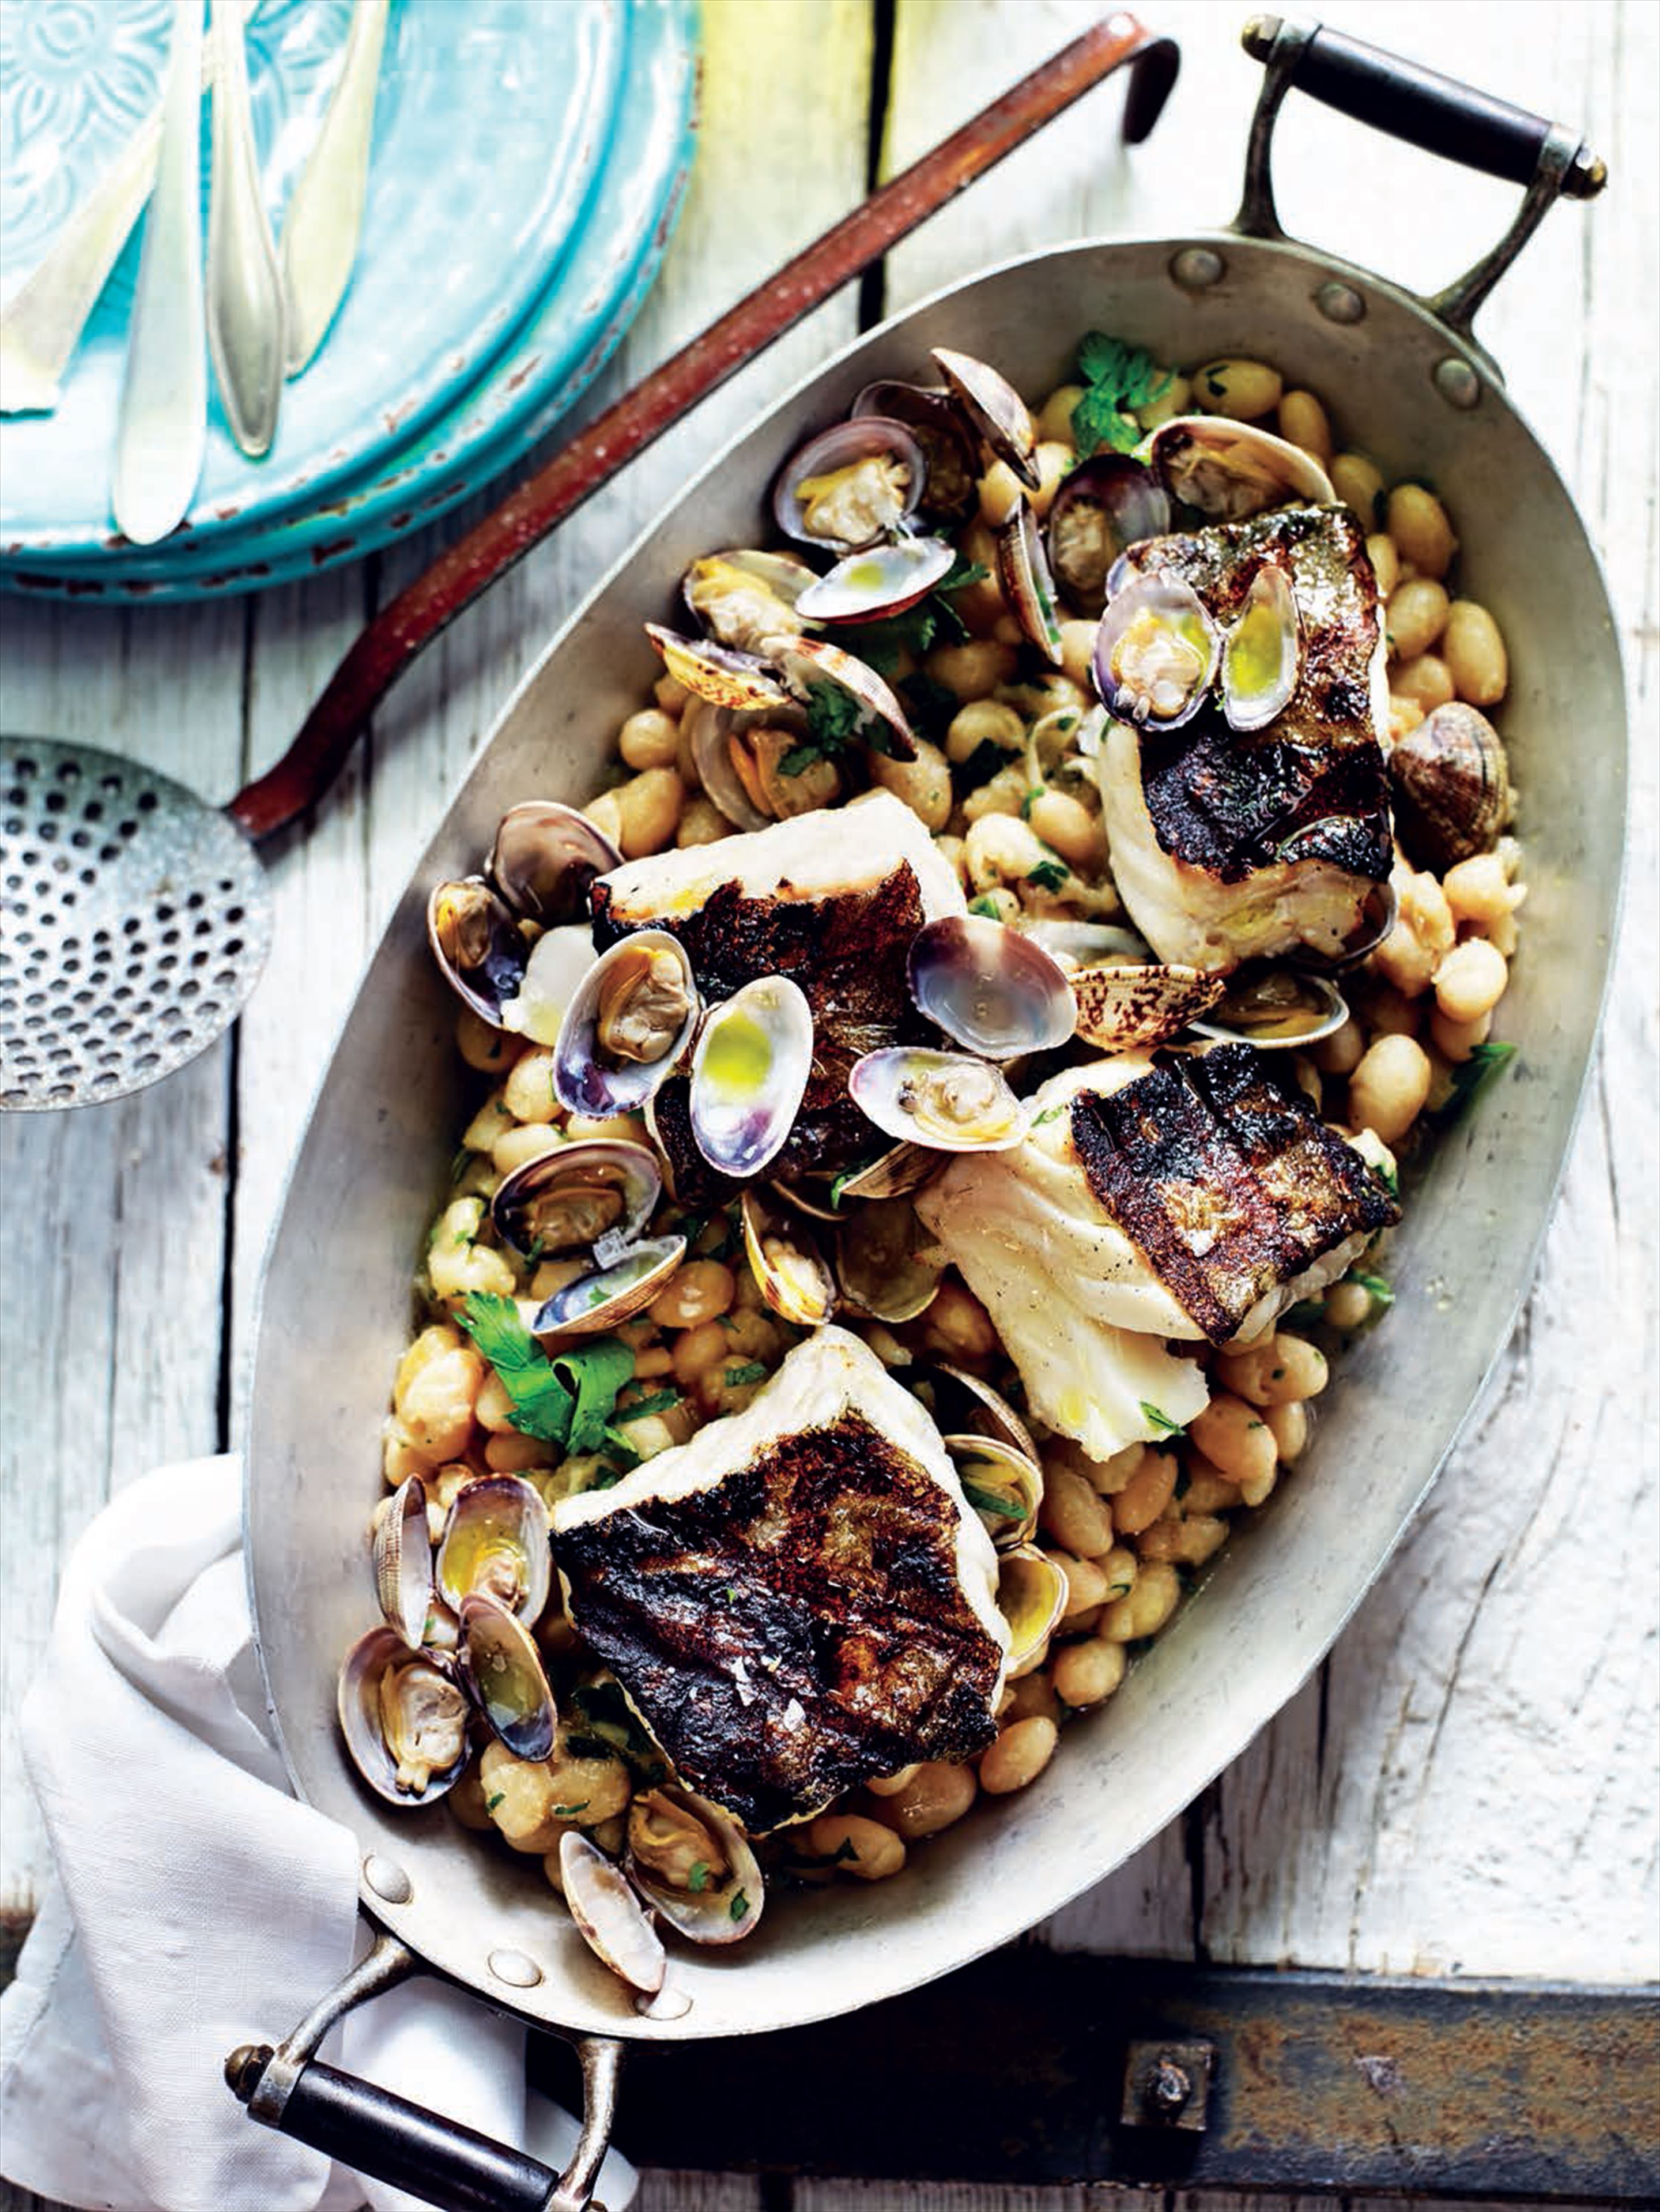 Smoked cod with white beans, clams and parsley